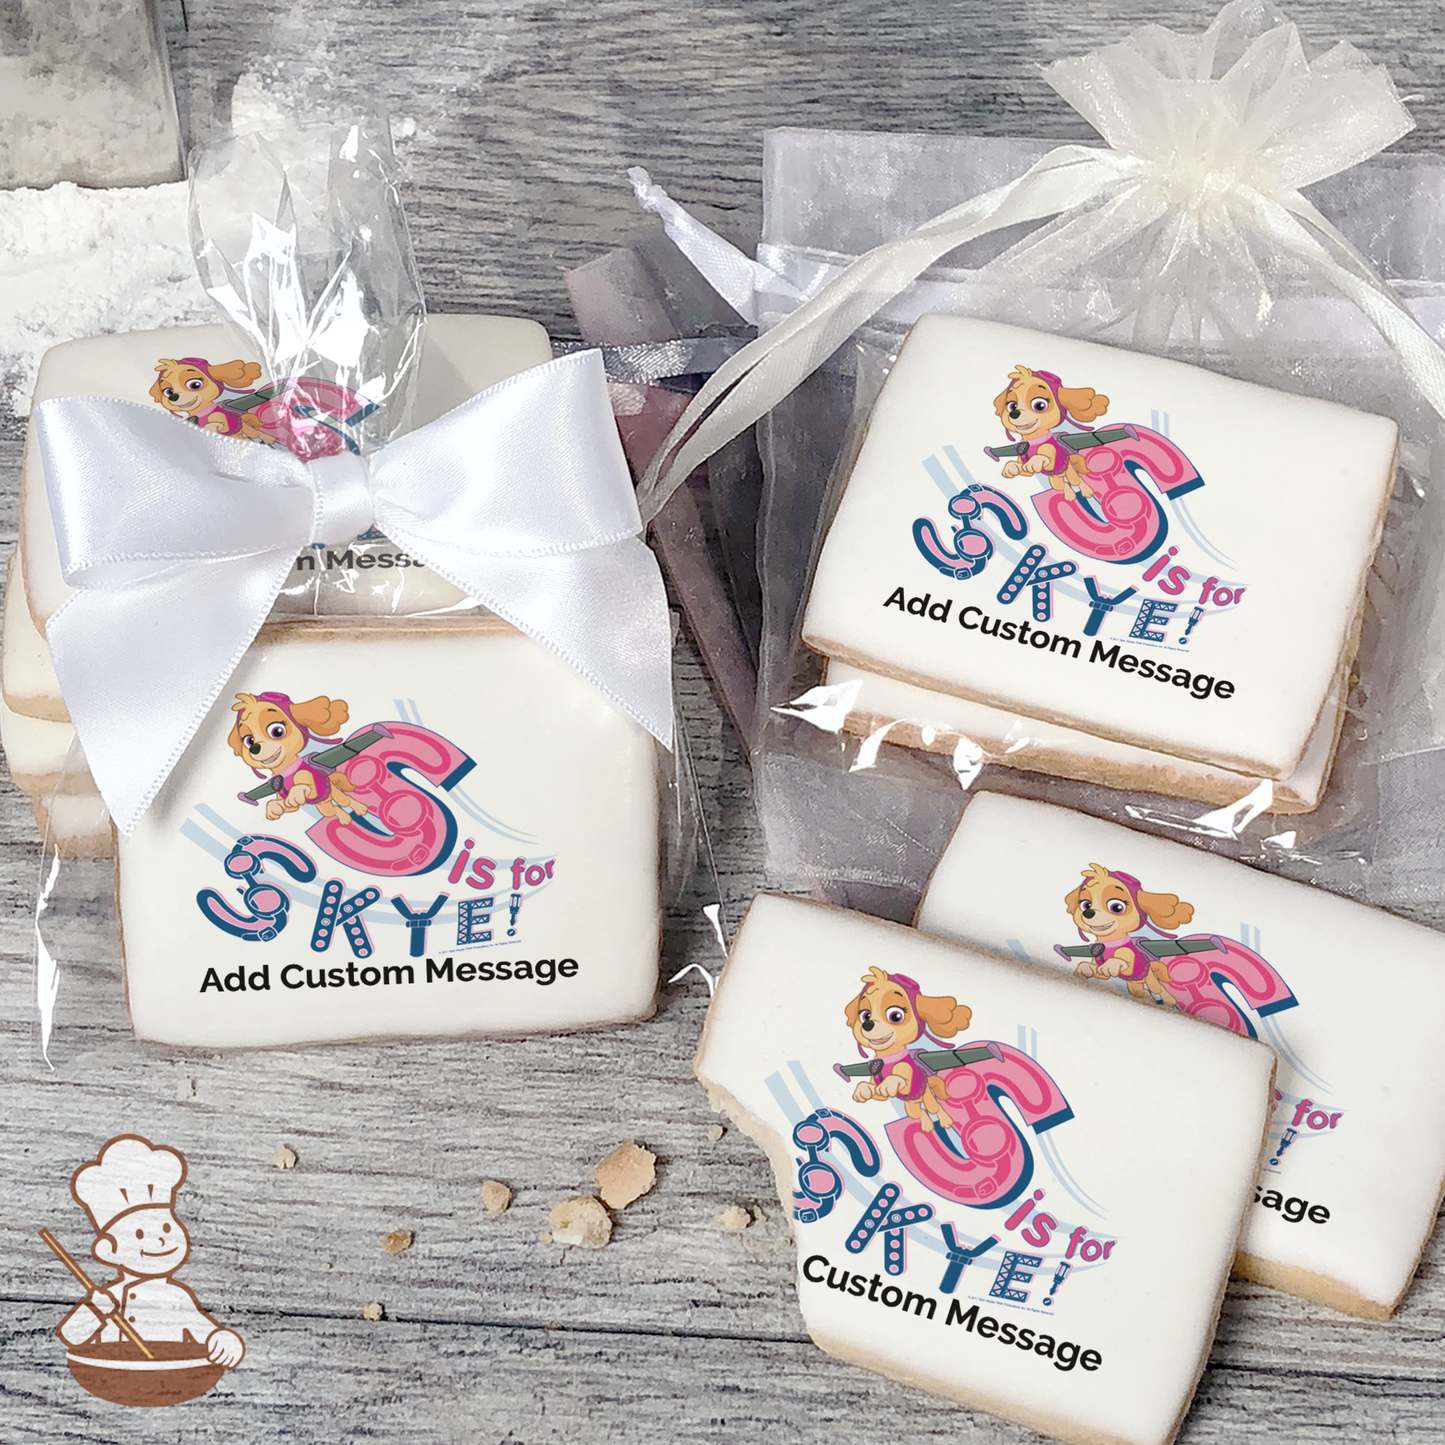 PAW Patrol S is for Skye Custom Message Cookies (Rectangle)